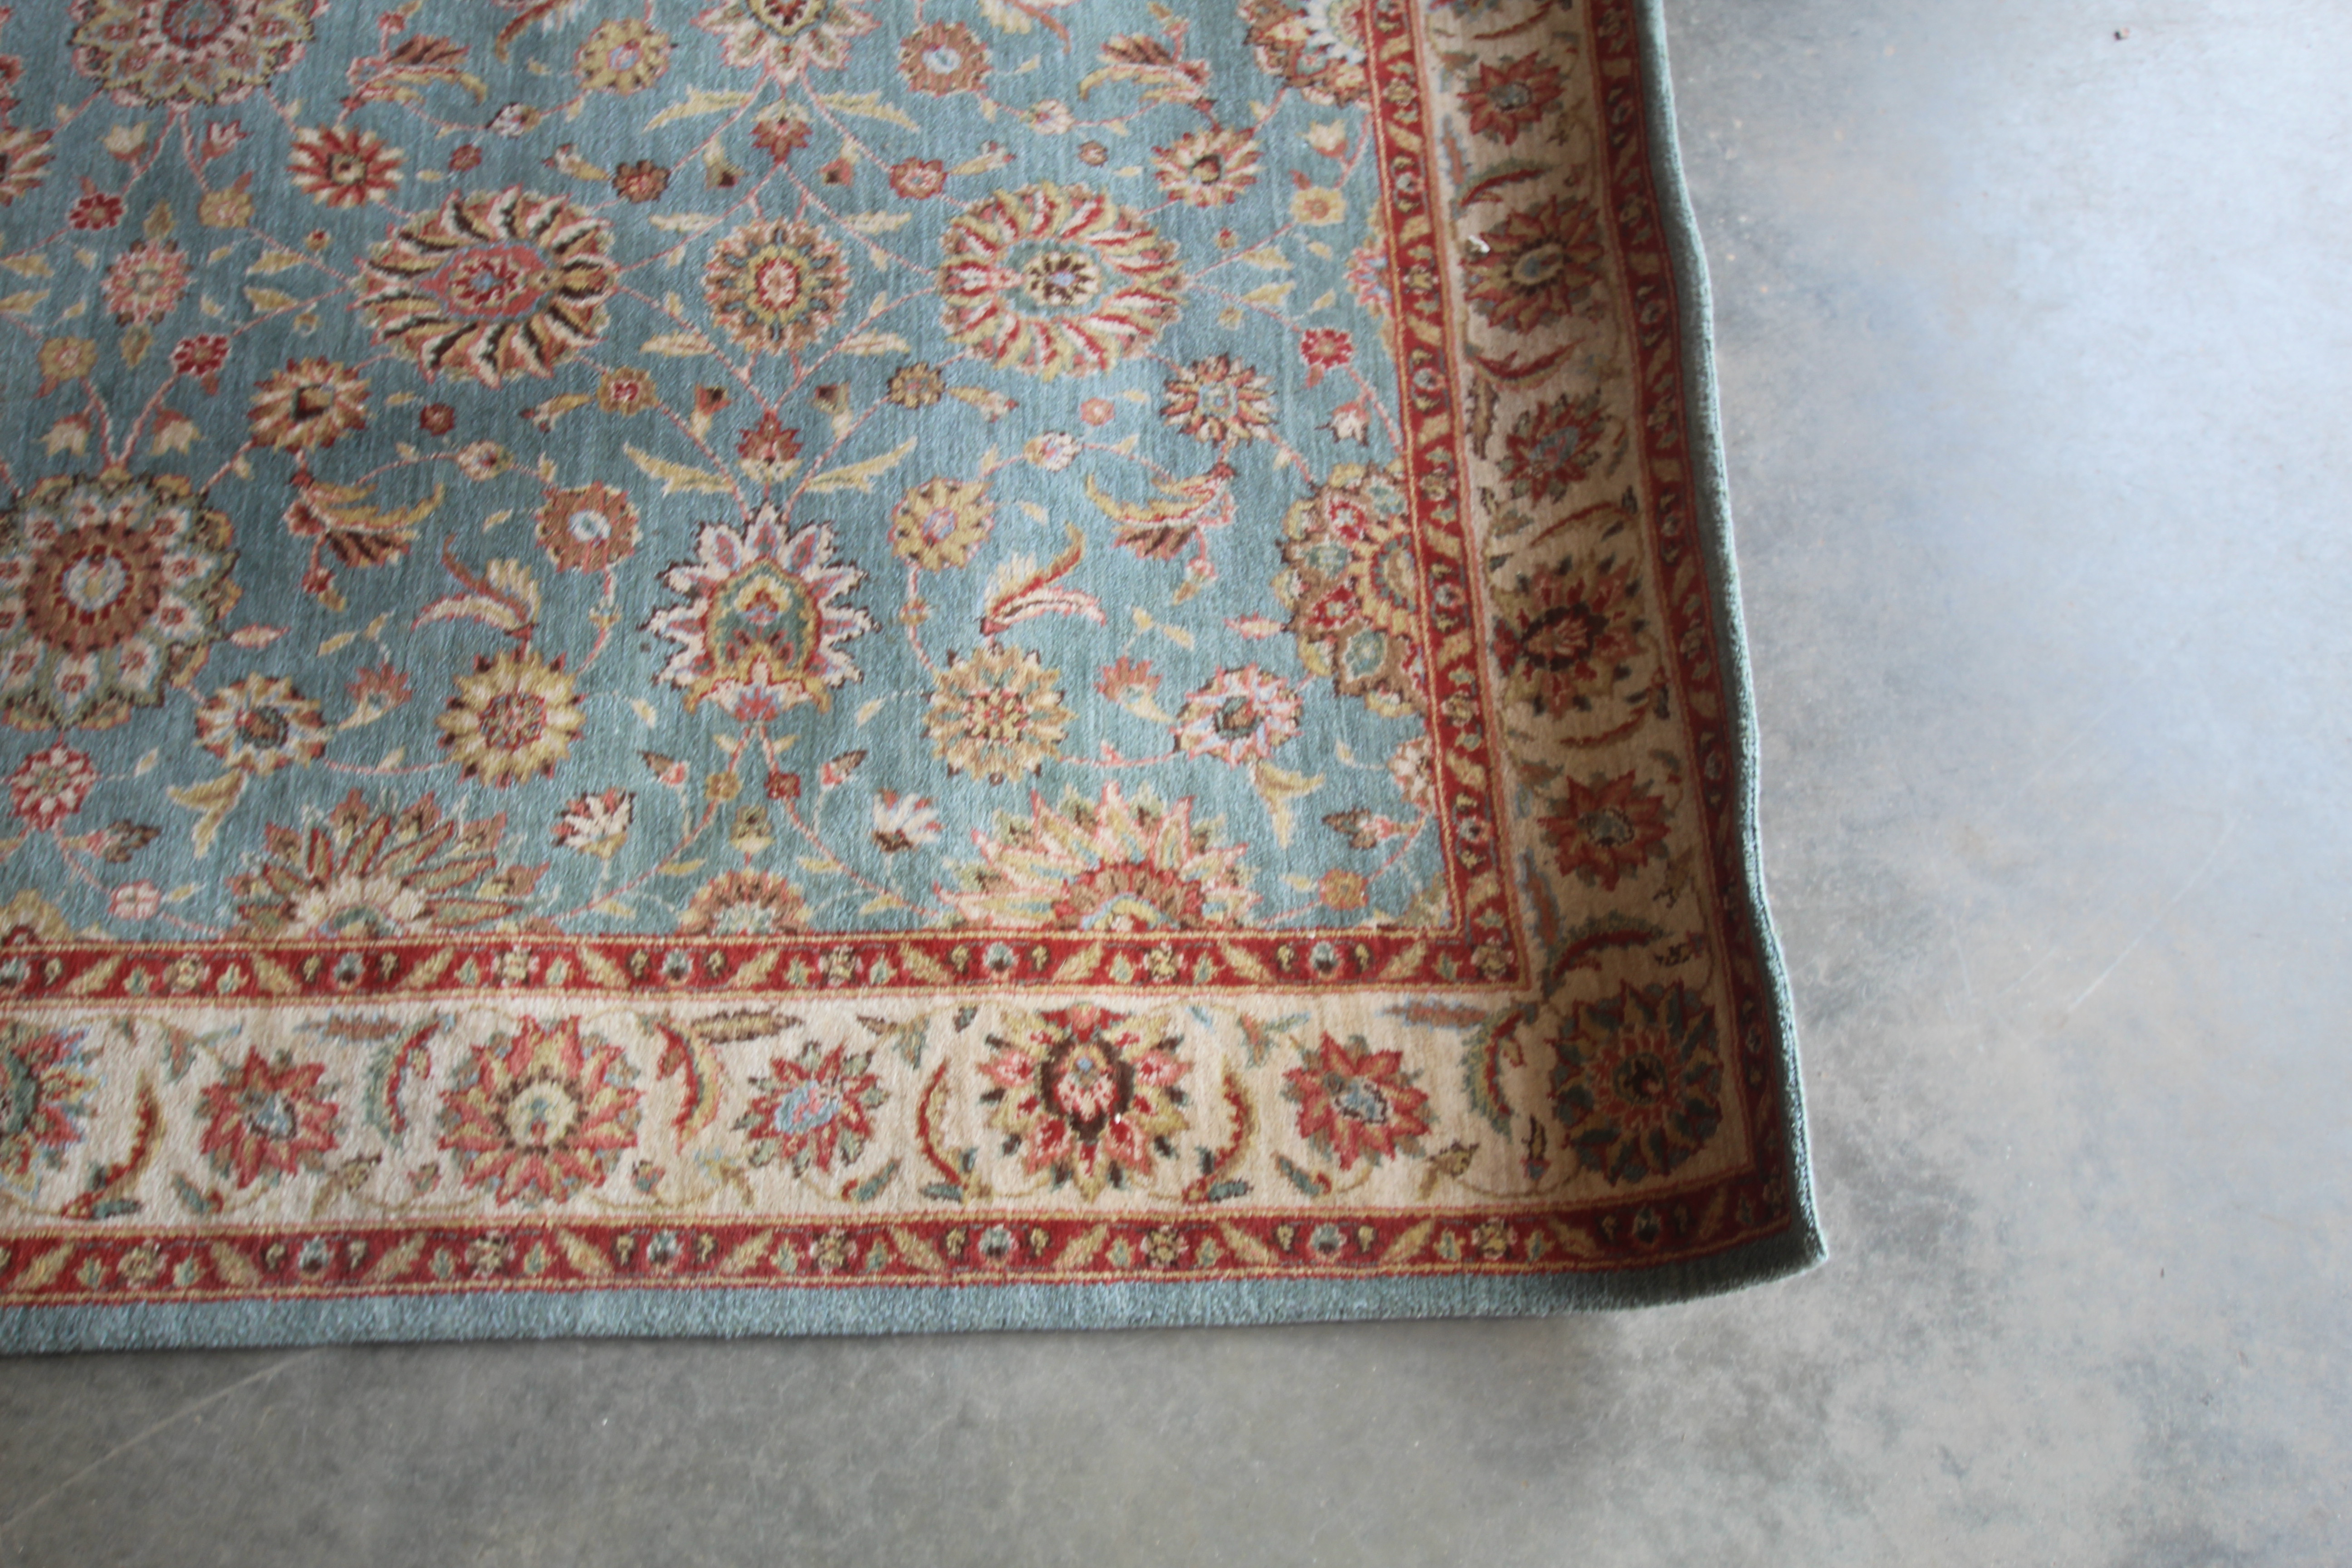 An approx. 8'3" x 5'5" floral patterned rug - Image 2 of 6